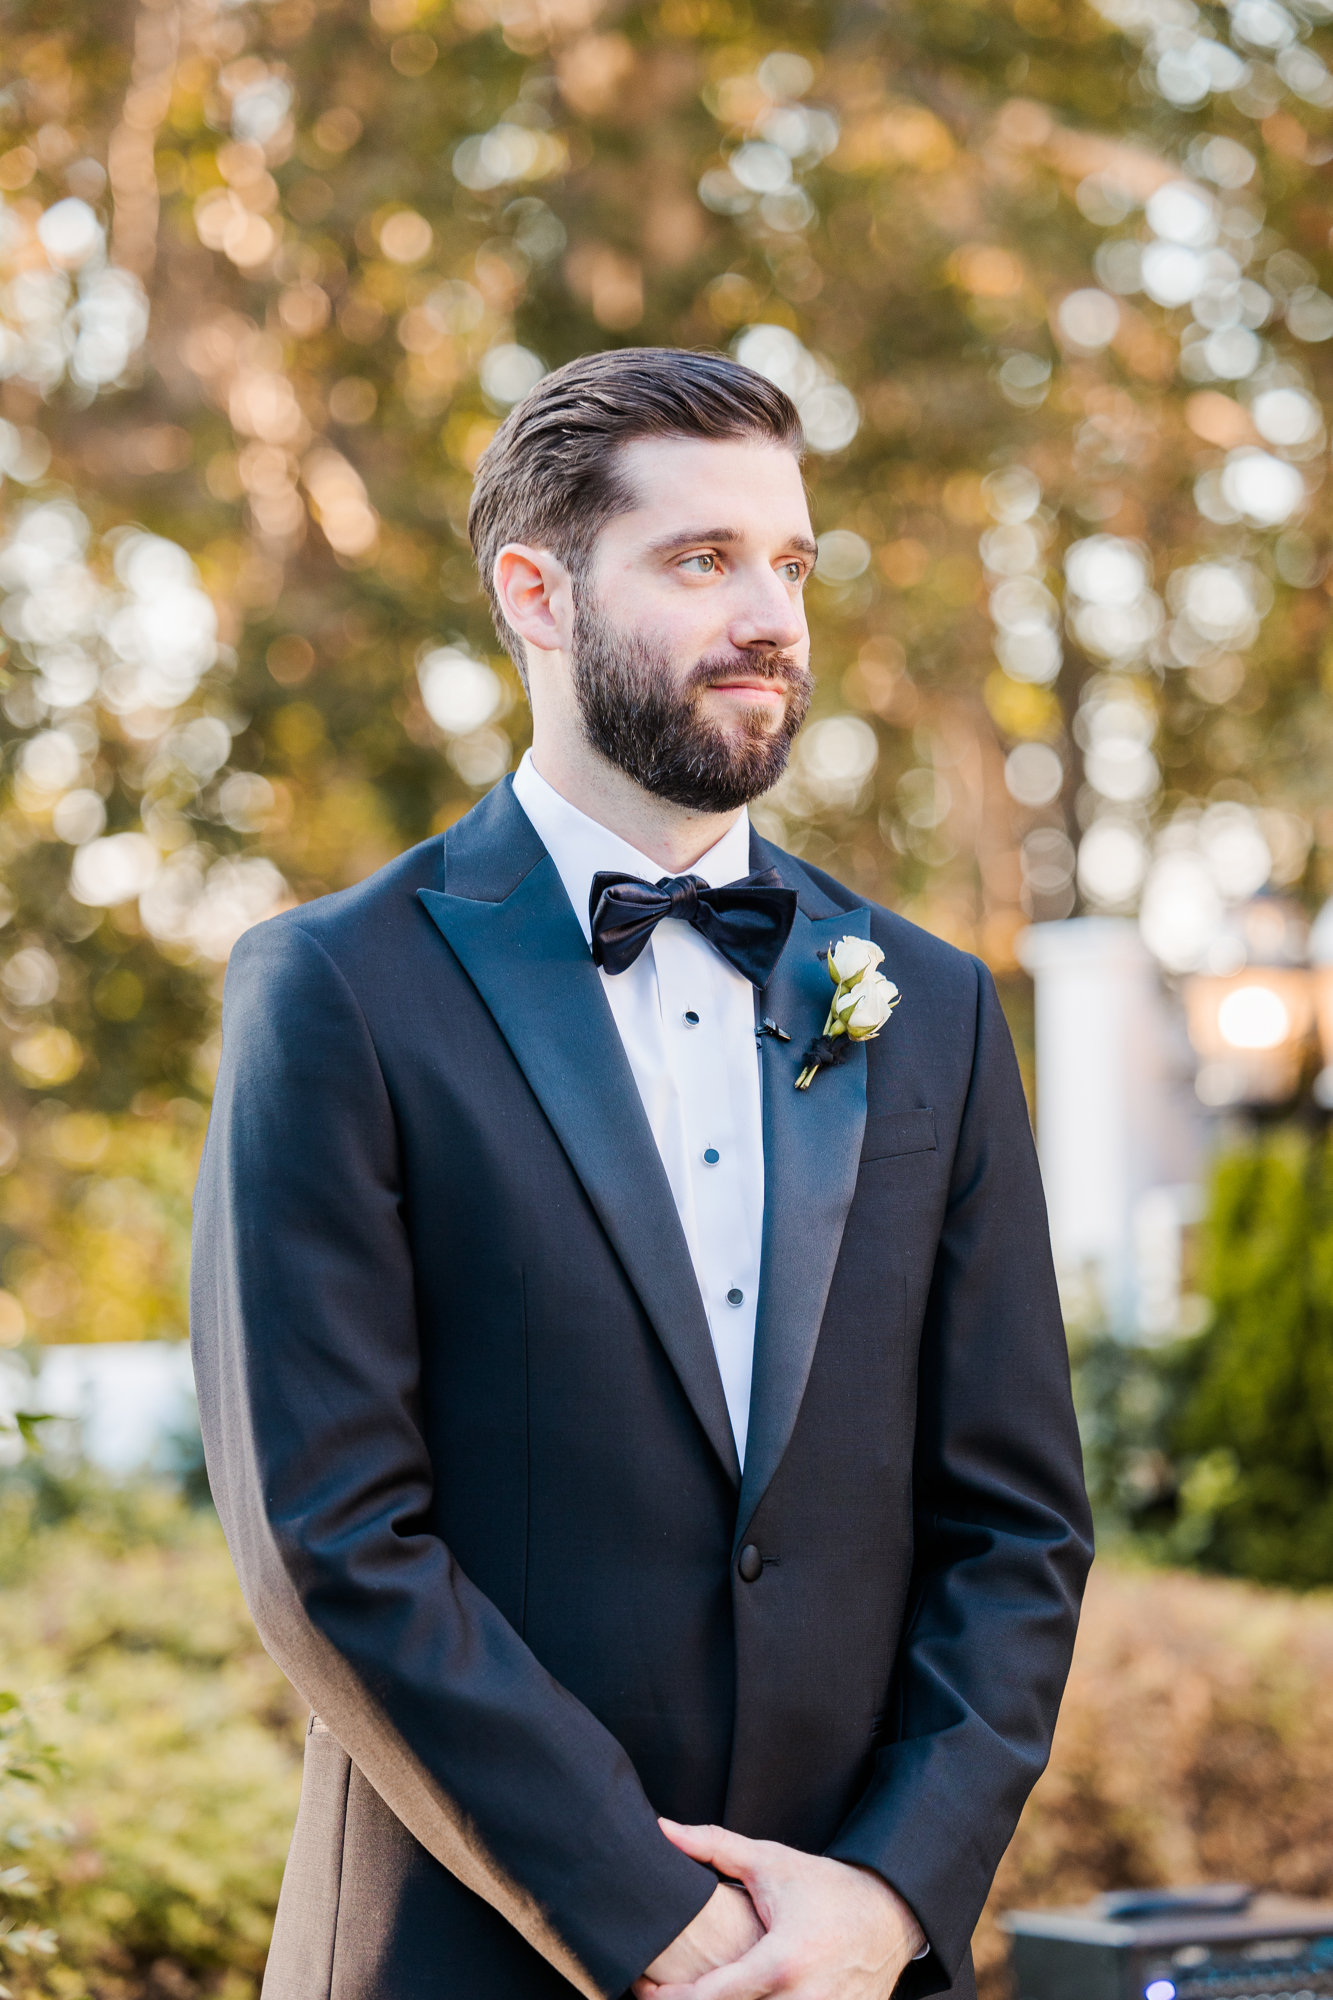 Stylish Sunset Briarcliff Manor Wedding Photos in Autumn in Hudson Valley